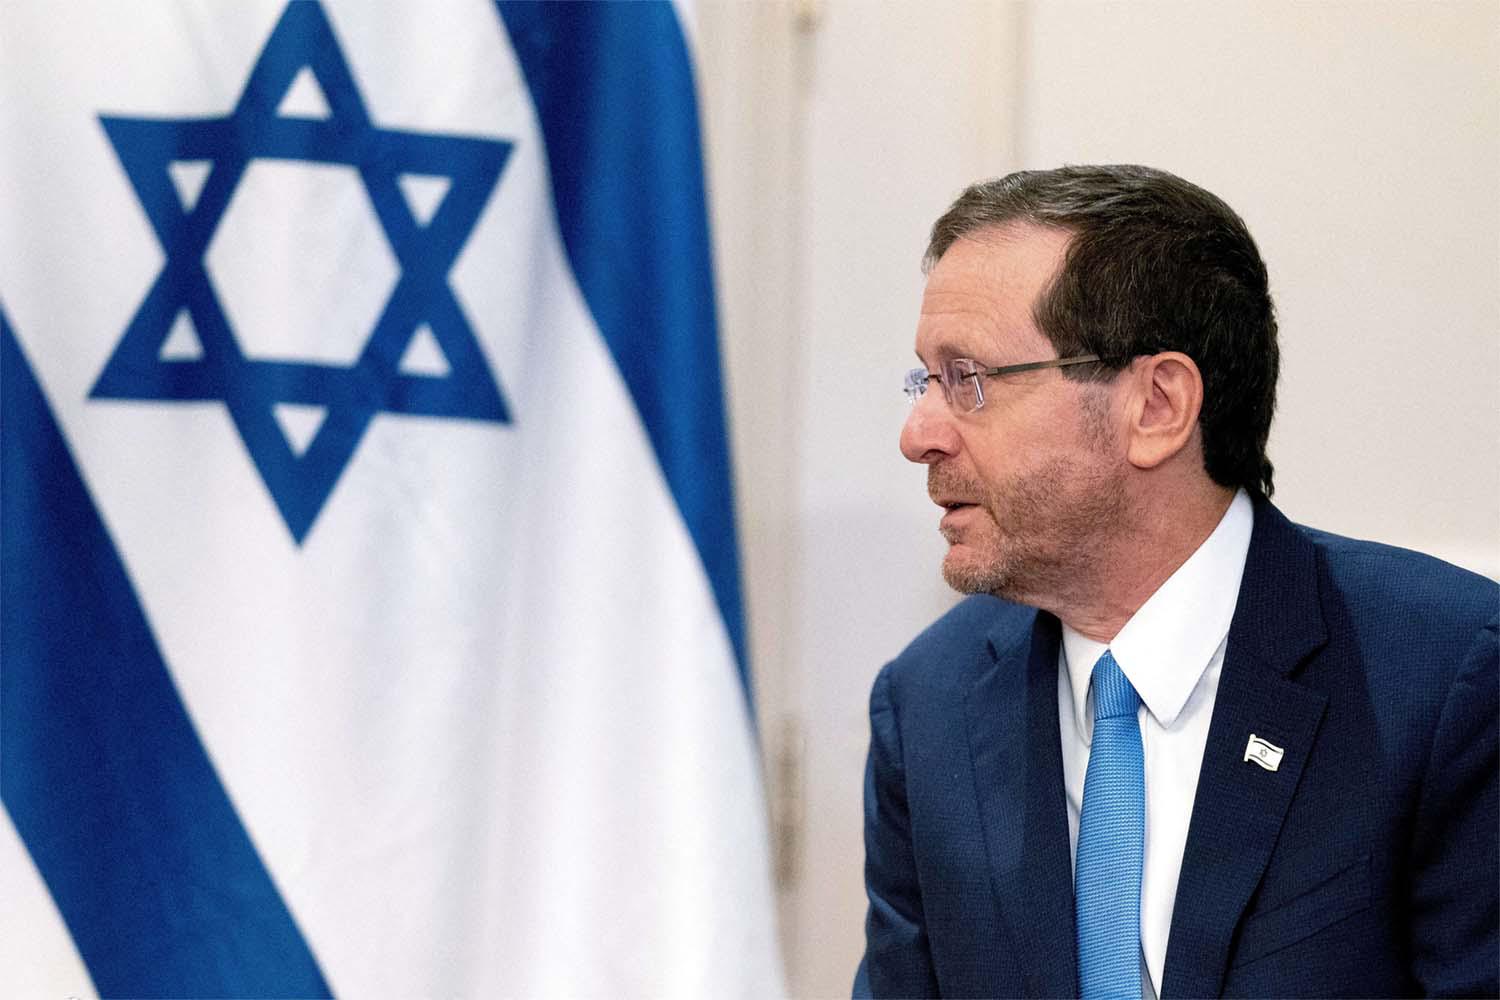 Herzog's visit will be the first to Bahrain by an Israeli head of state